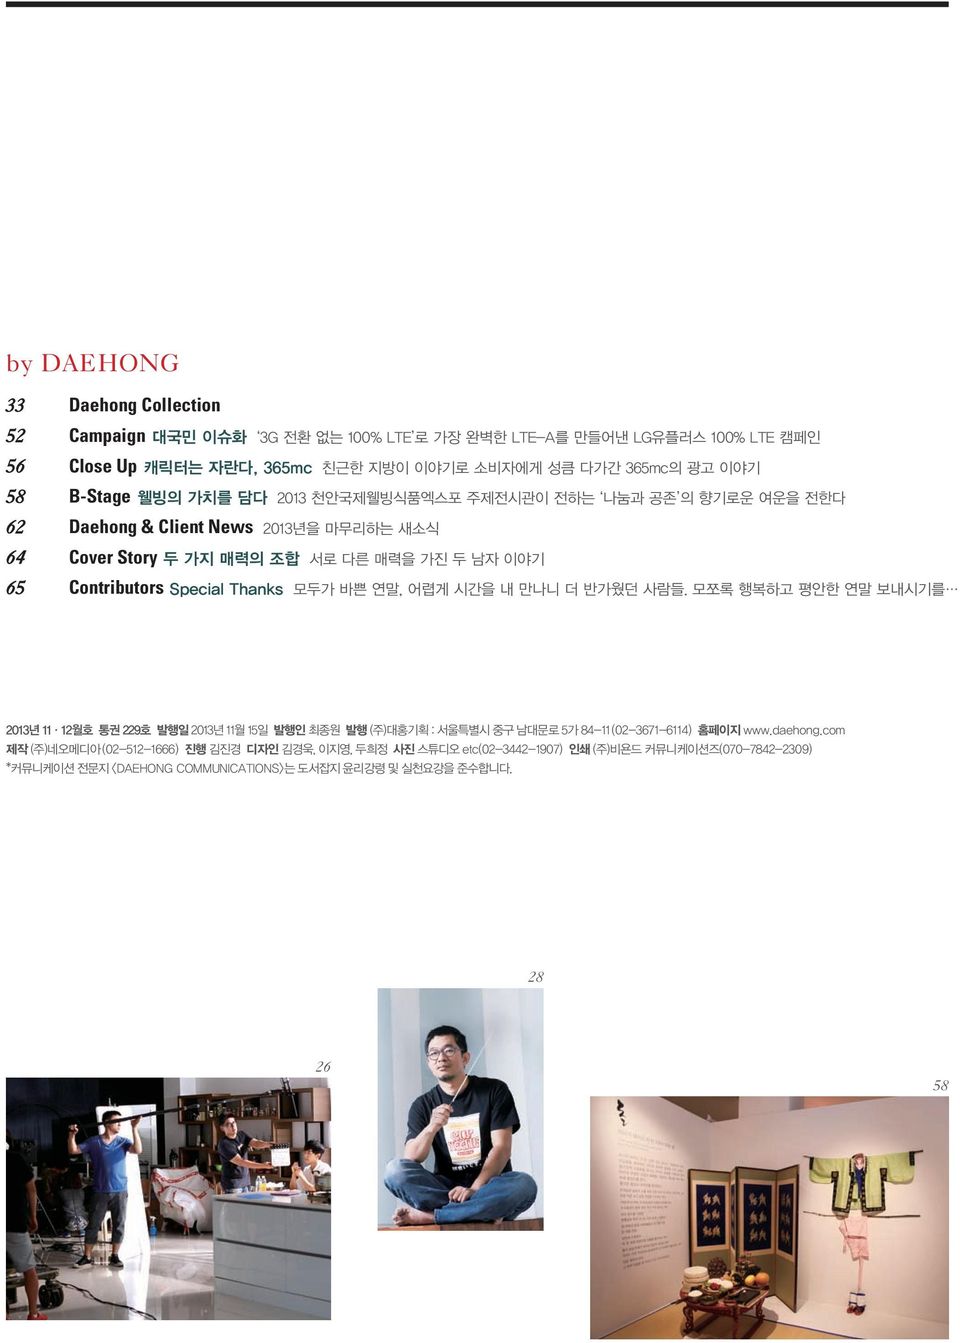 B-Stage 62 Daehong & Client News